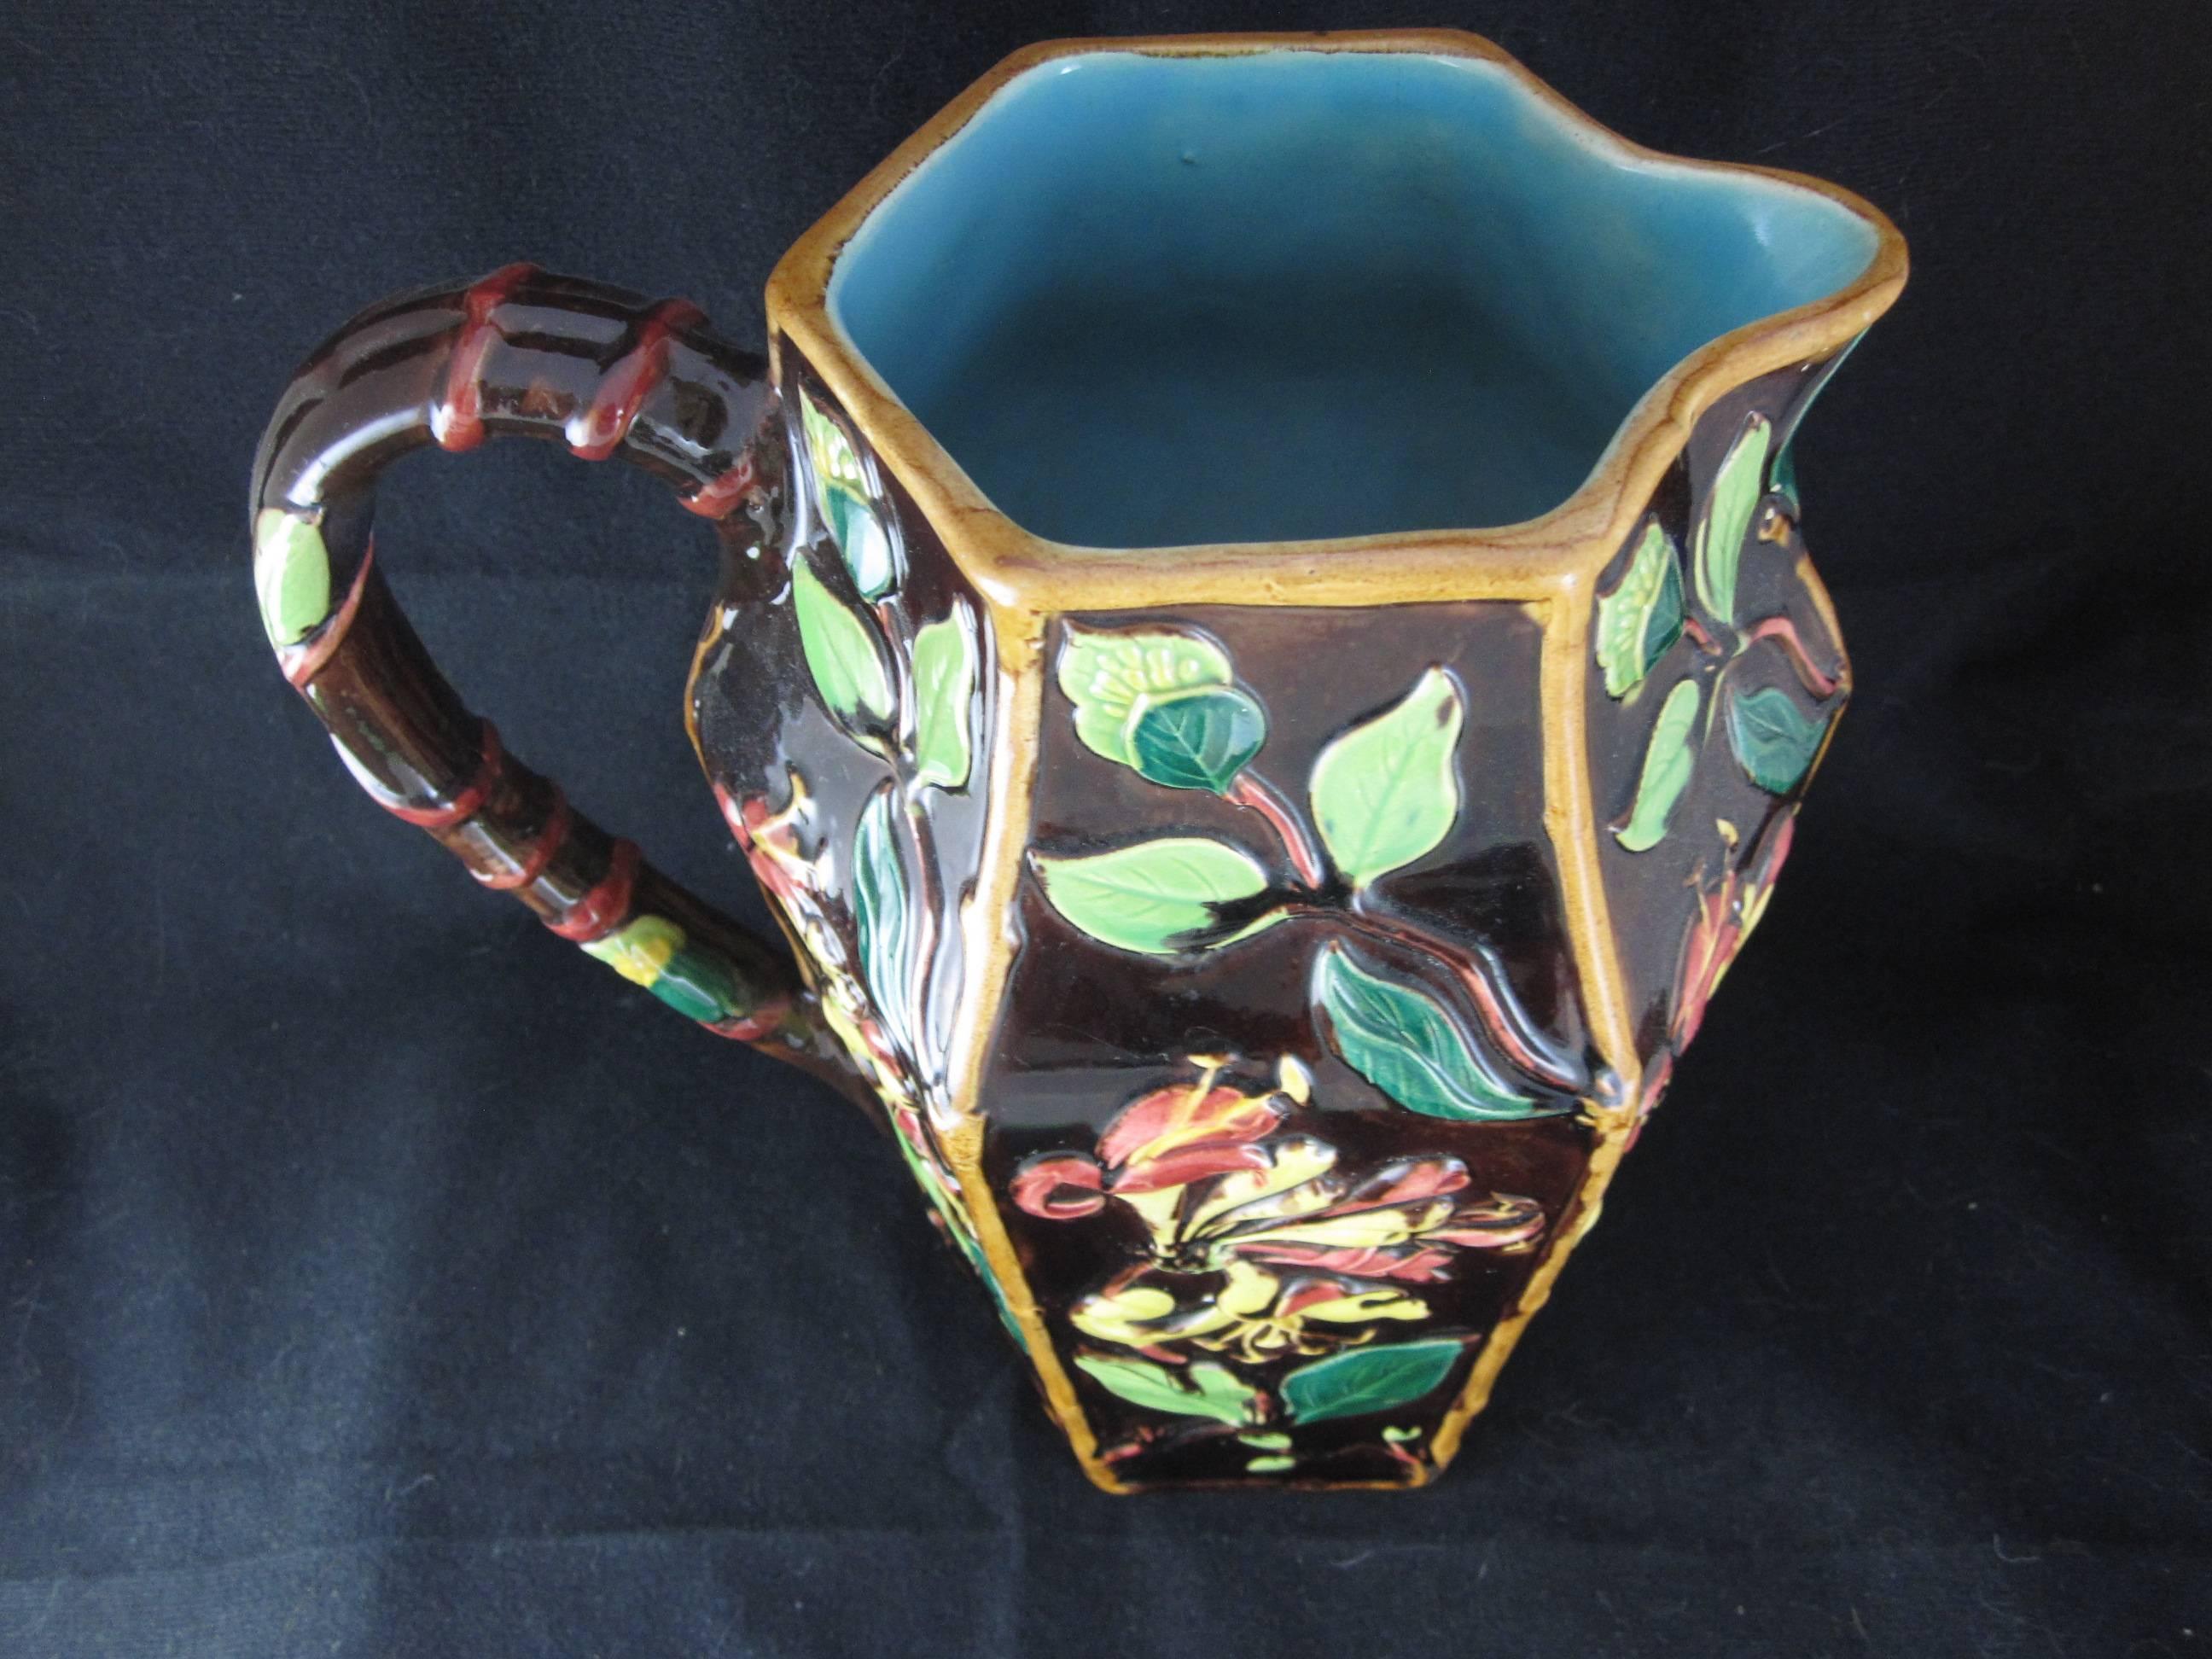 A scarce English Majolica pitcher, attributed to William Brownfield, circa 1860. A large and heavy Aesthetic Movement piece showing aspects of the Honeysuckle vine. The flowers are glazed in yellow and deep pink with leaves in varying shades of